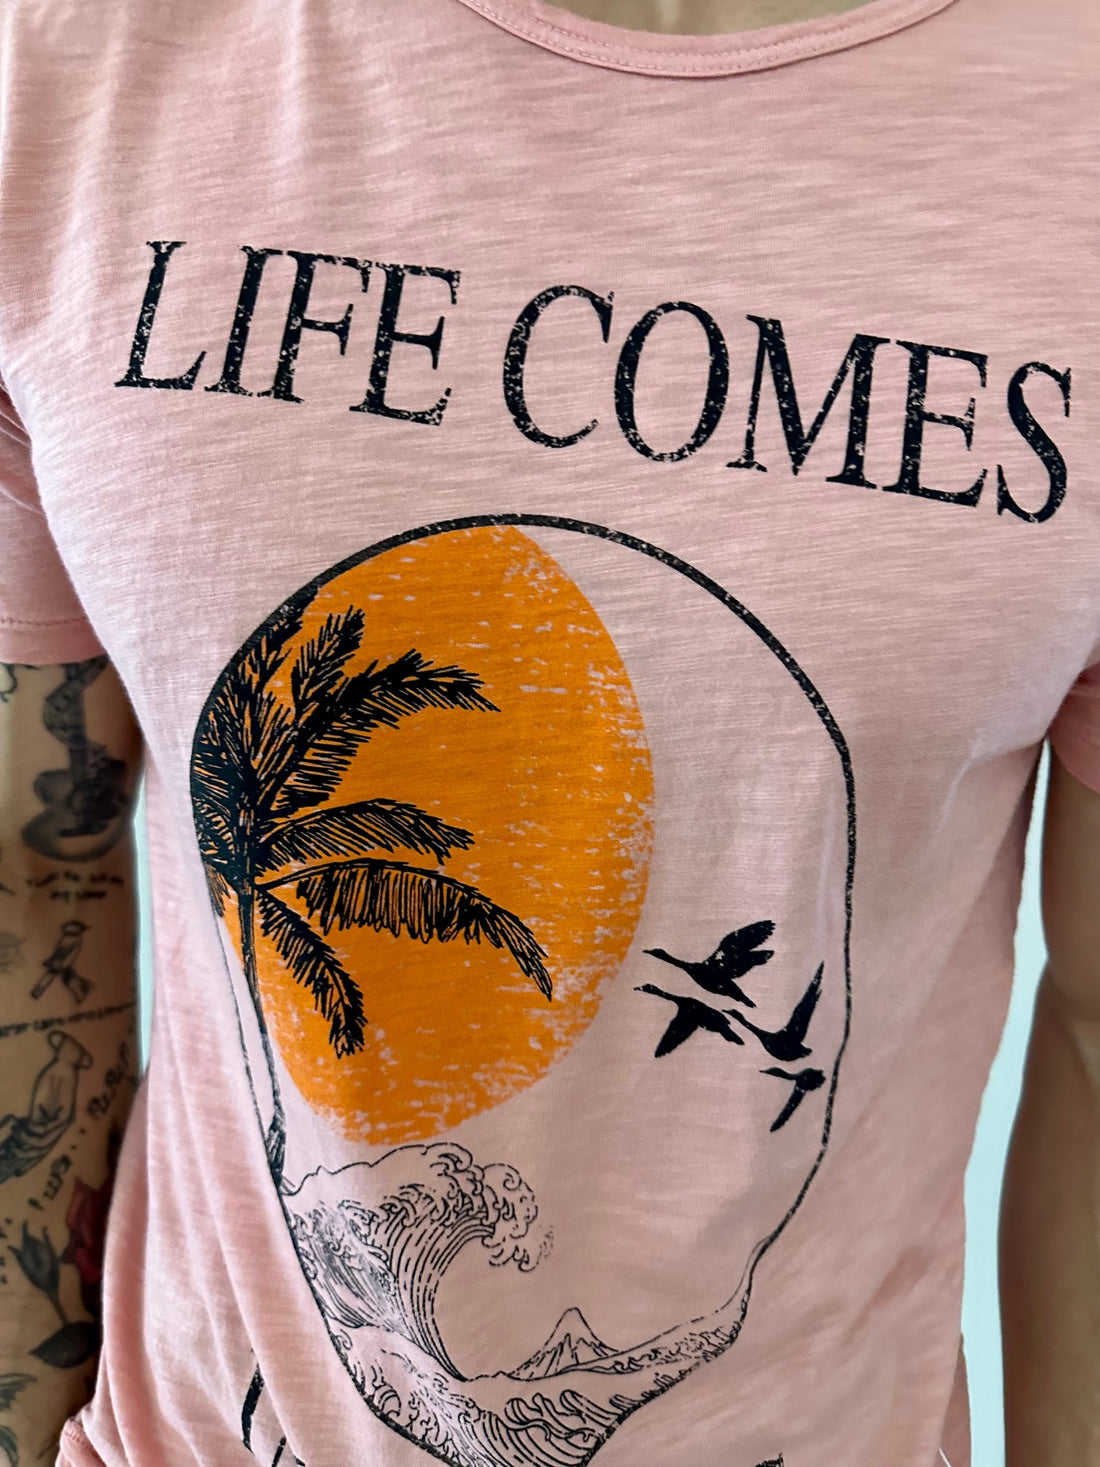 "LIFE COMES IN WAVES" on our 4 Corners Crew neck (Salmon)